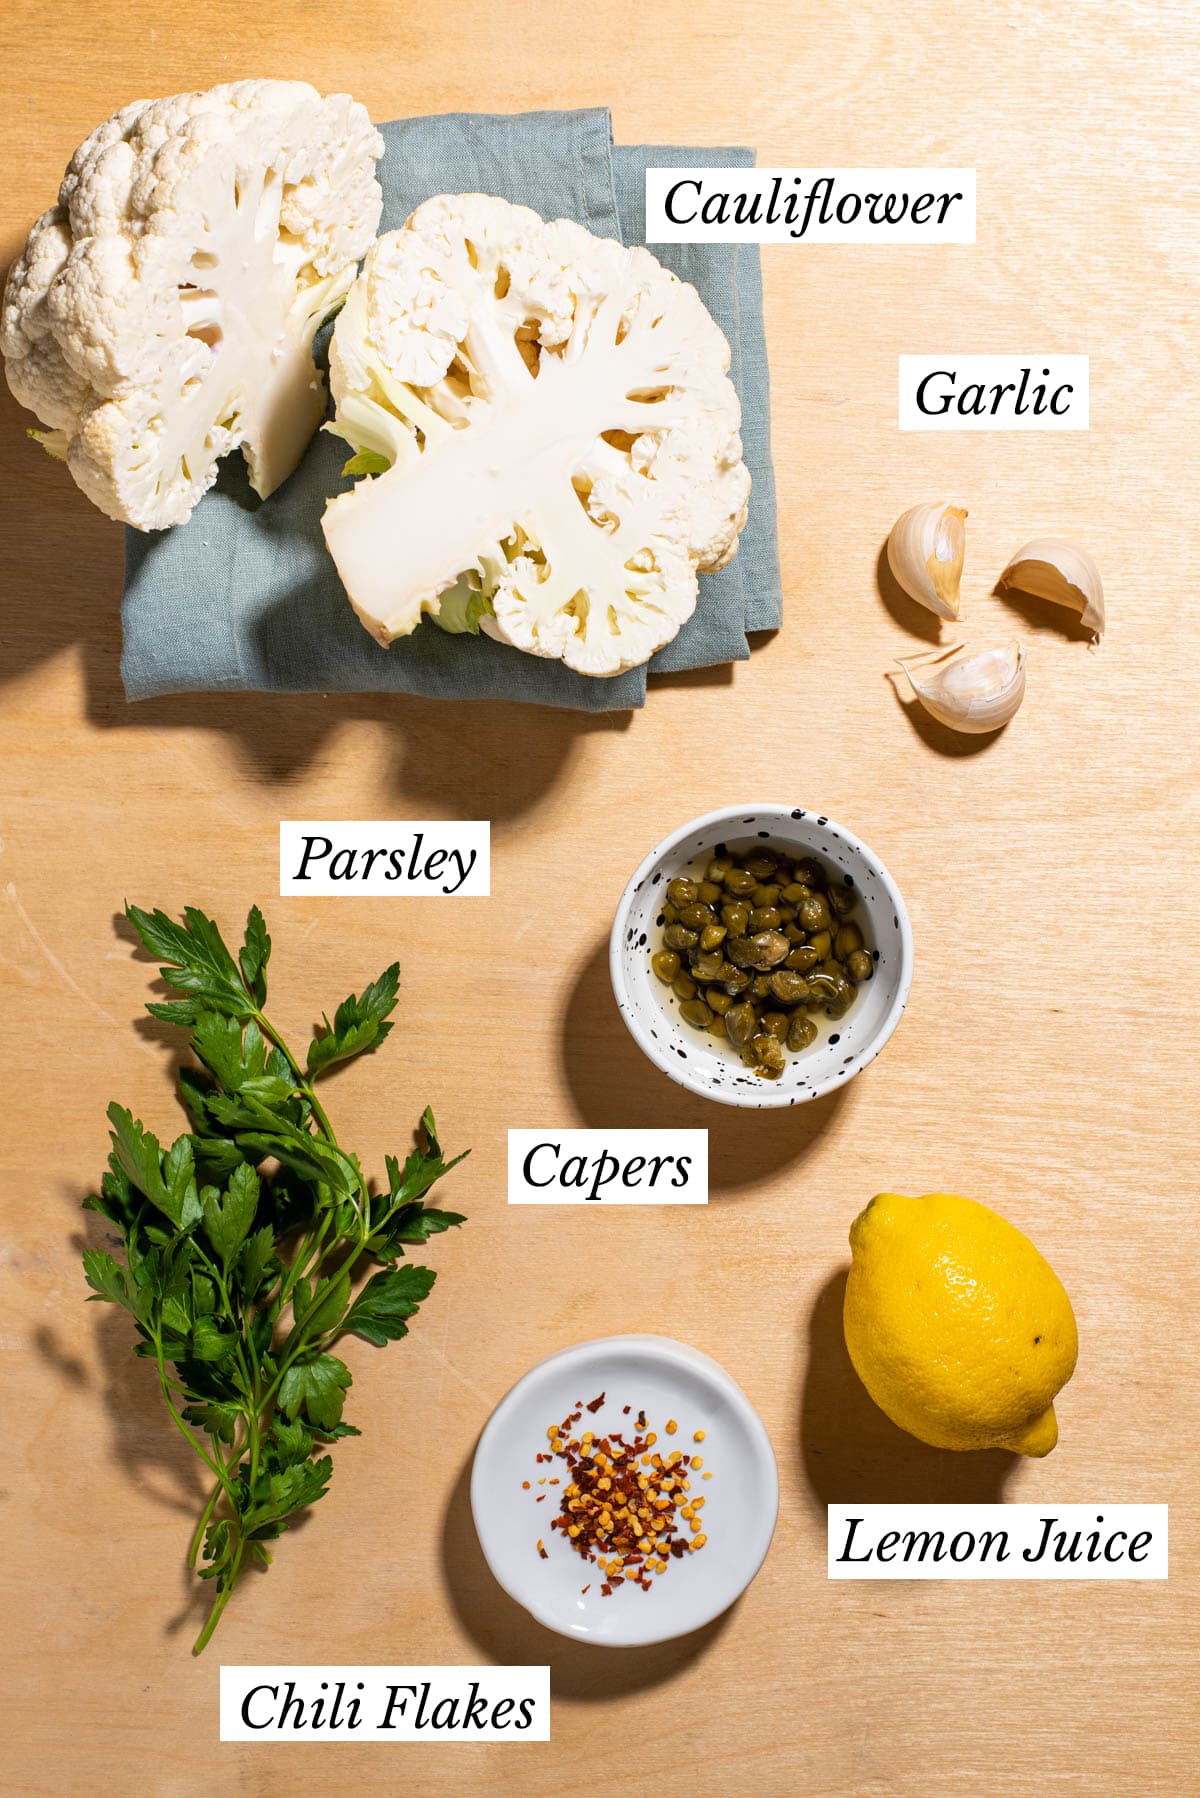 Ingredients gathered to make Mediterranean cauliflower with lemon, capers and parsley.